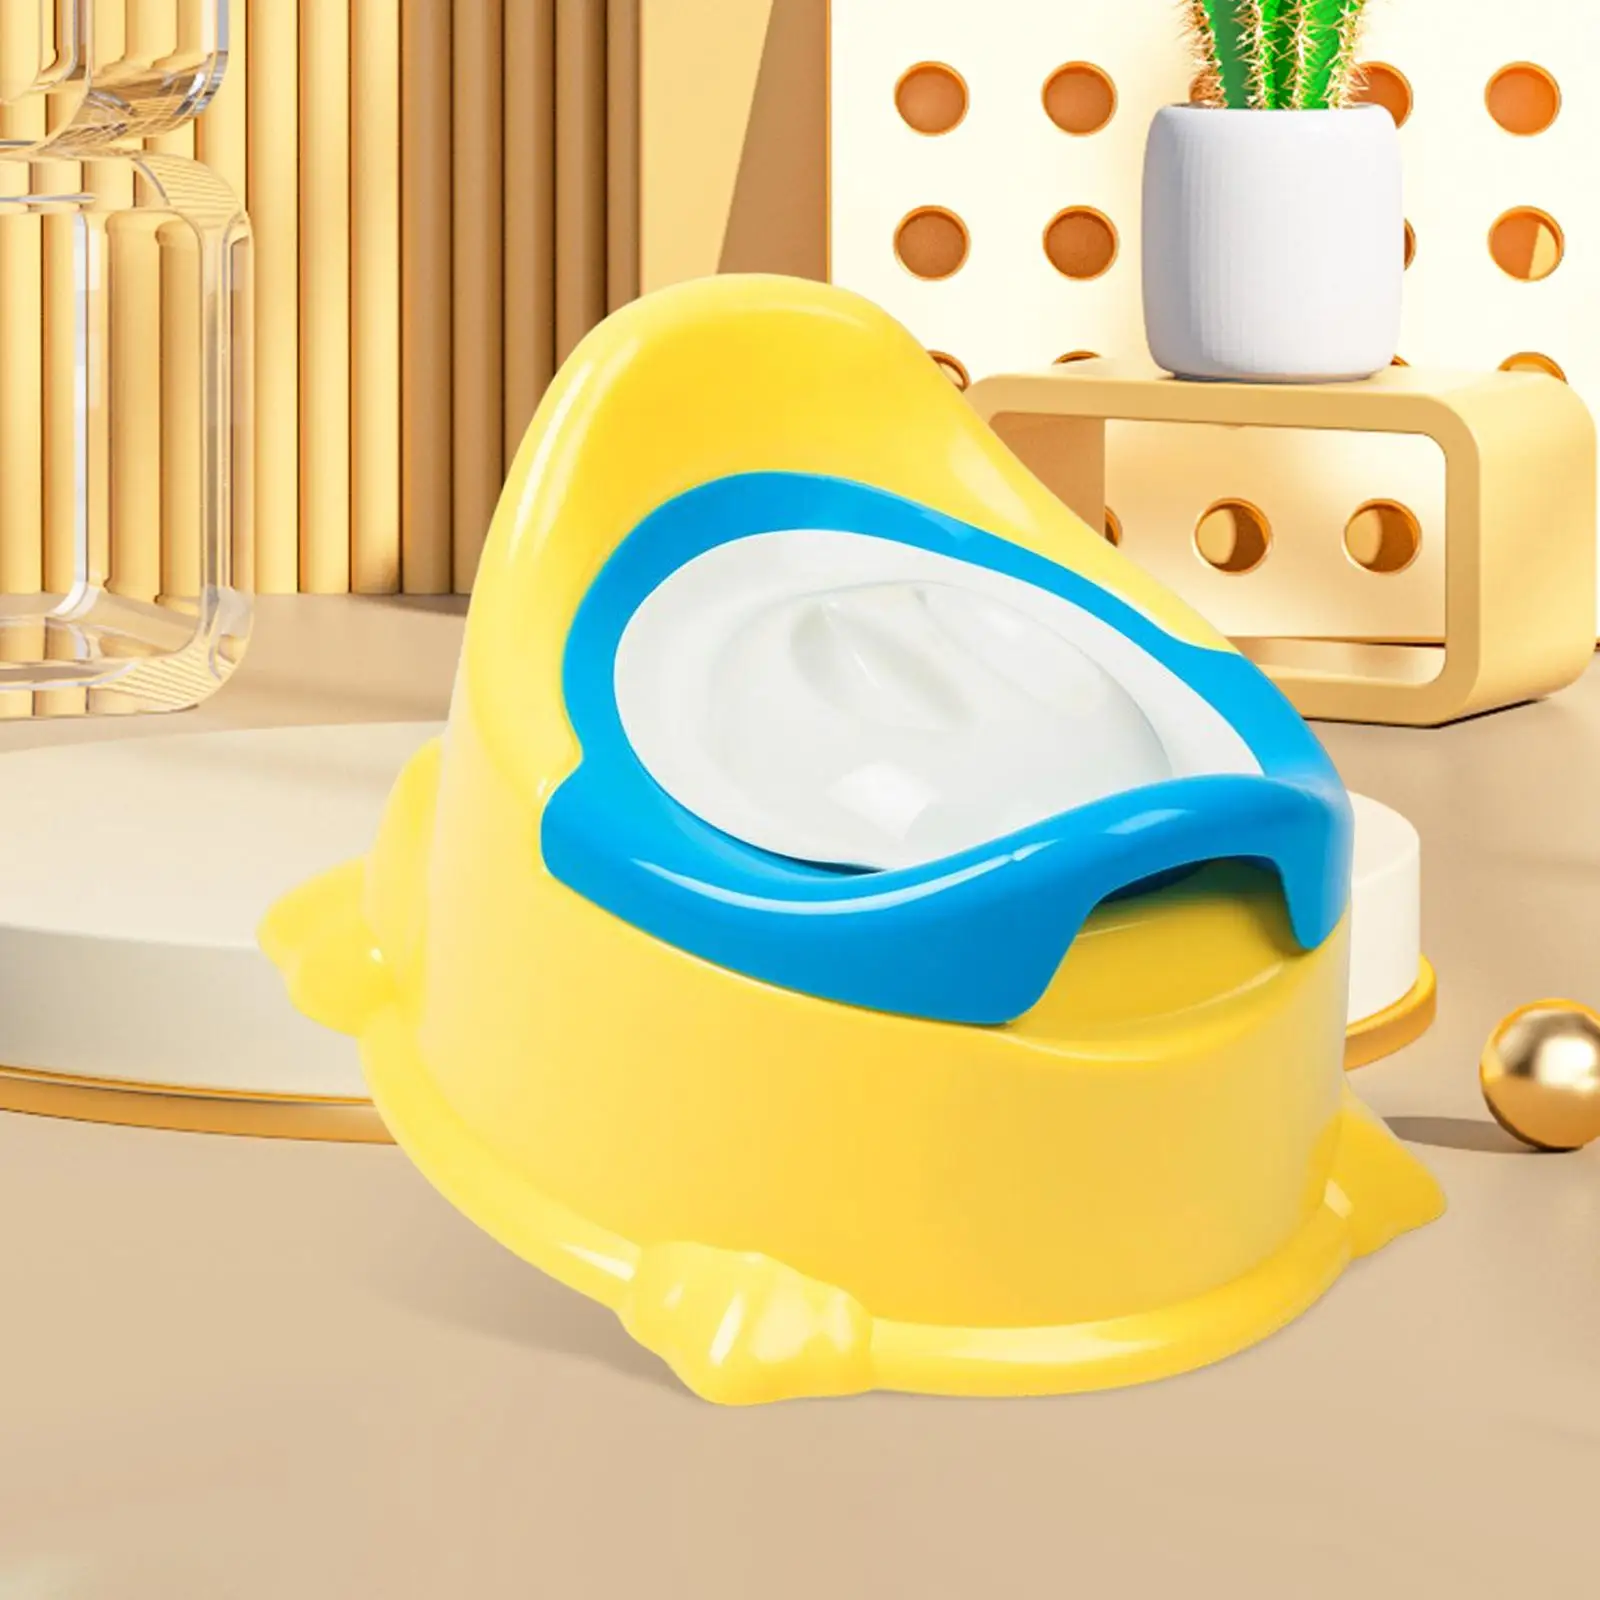 Baby Potty Kids Training Toilet Seat Comfortable for Babies 6-12 Month Baby